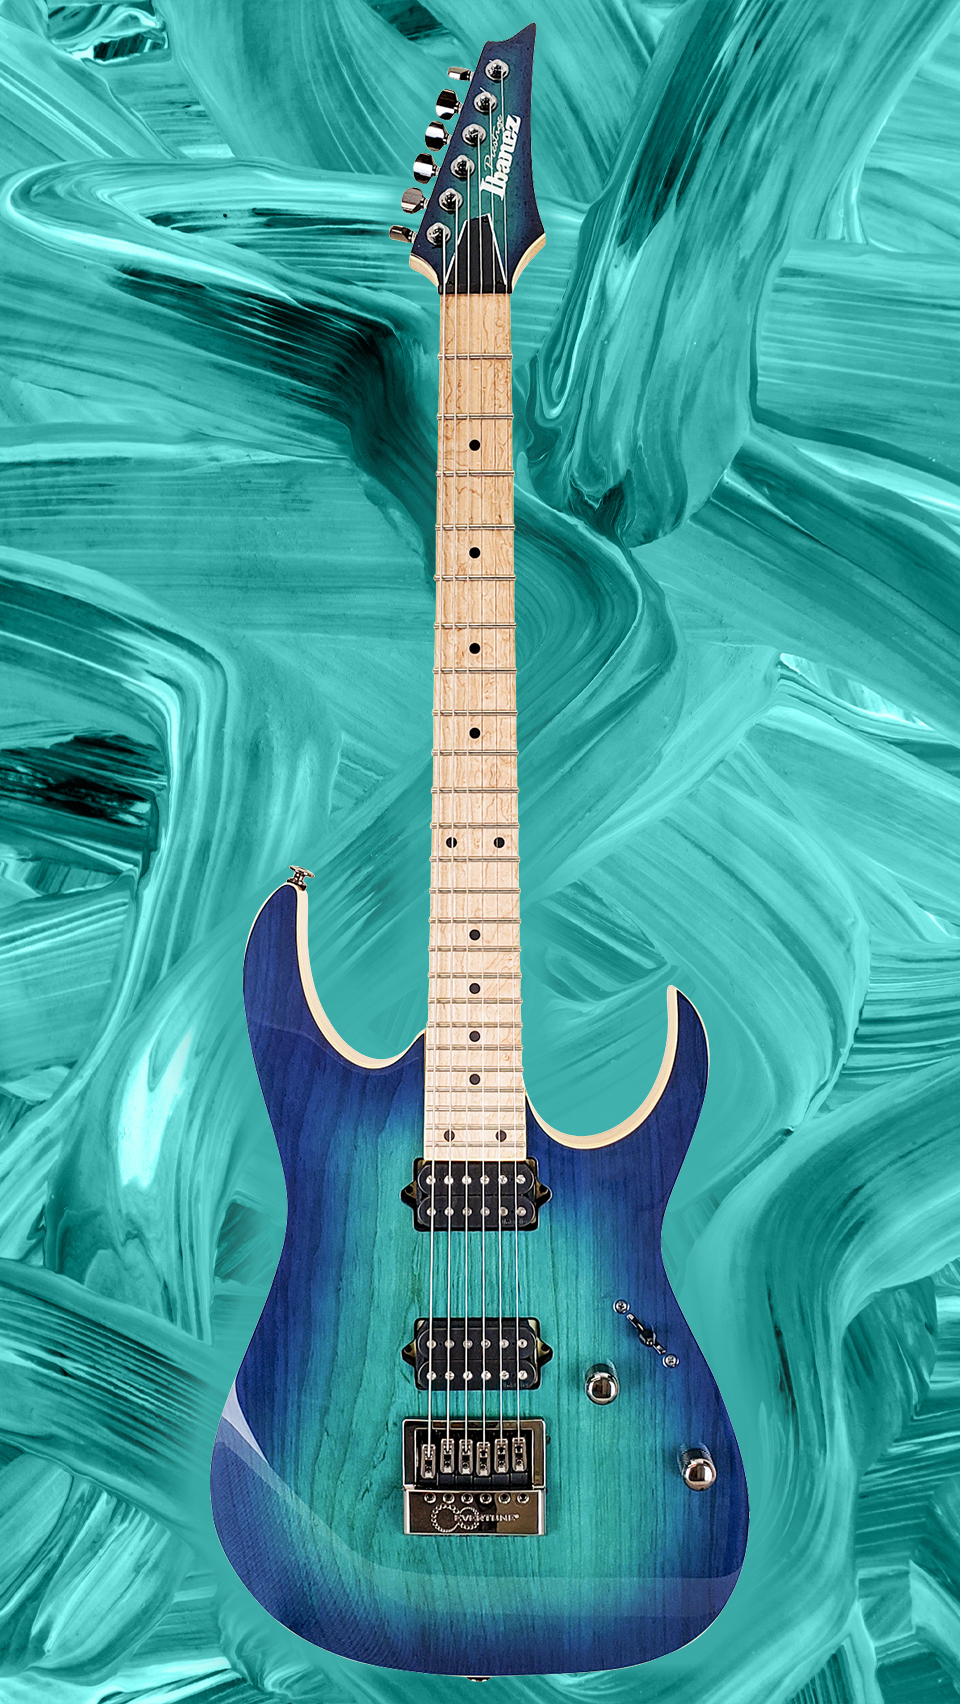 Guitar Art: Ibanez with EverTune